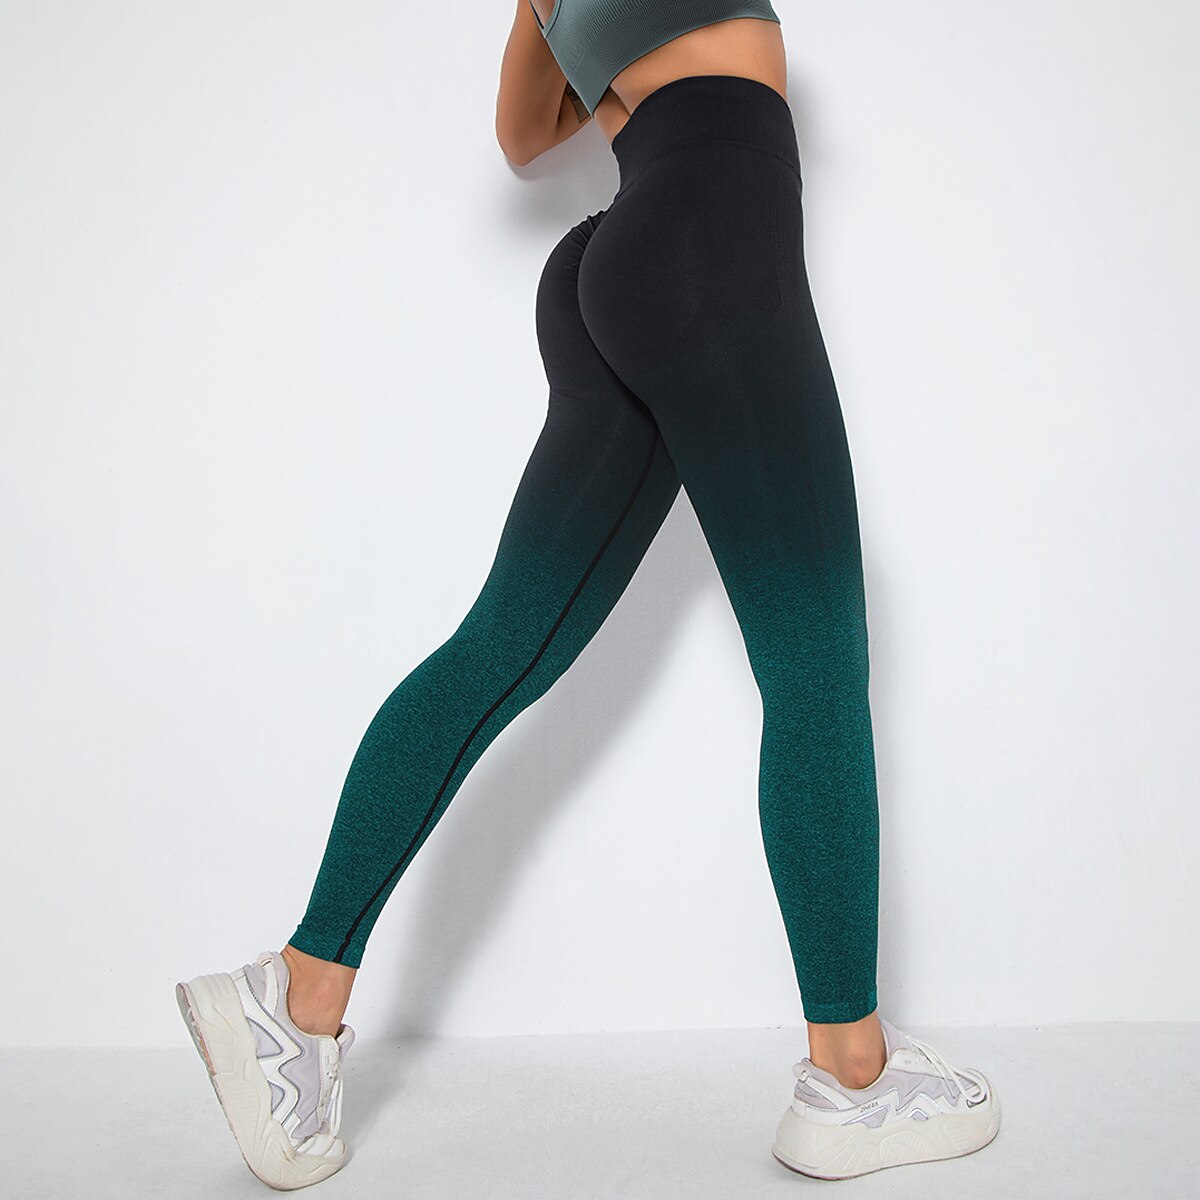  Seamless Workout Leggings For Women High Waisted Tummy  Control Yoga Pants Gym Slimming Tights Emerald S